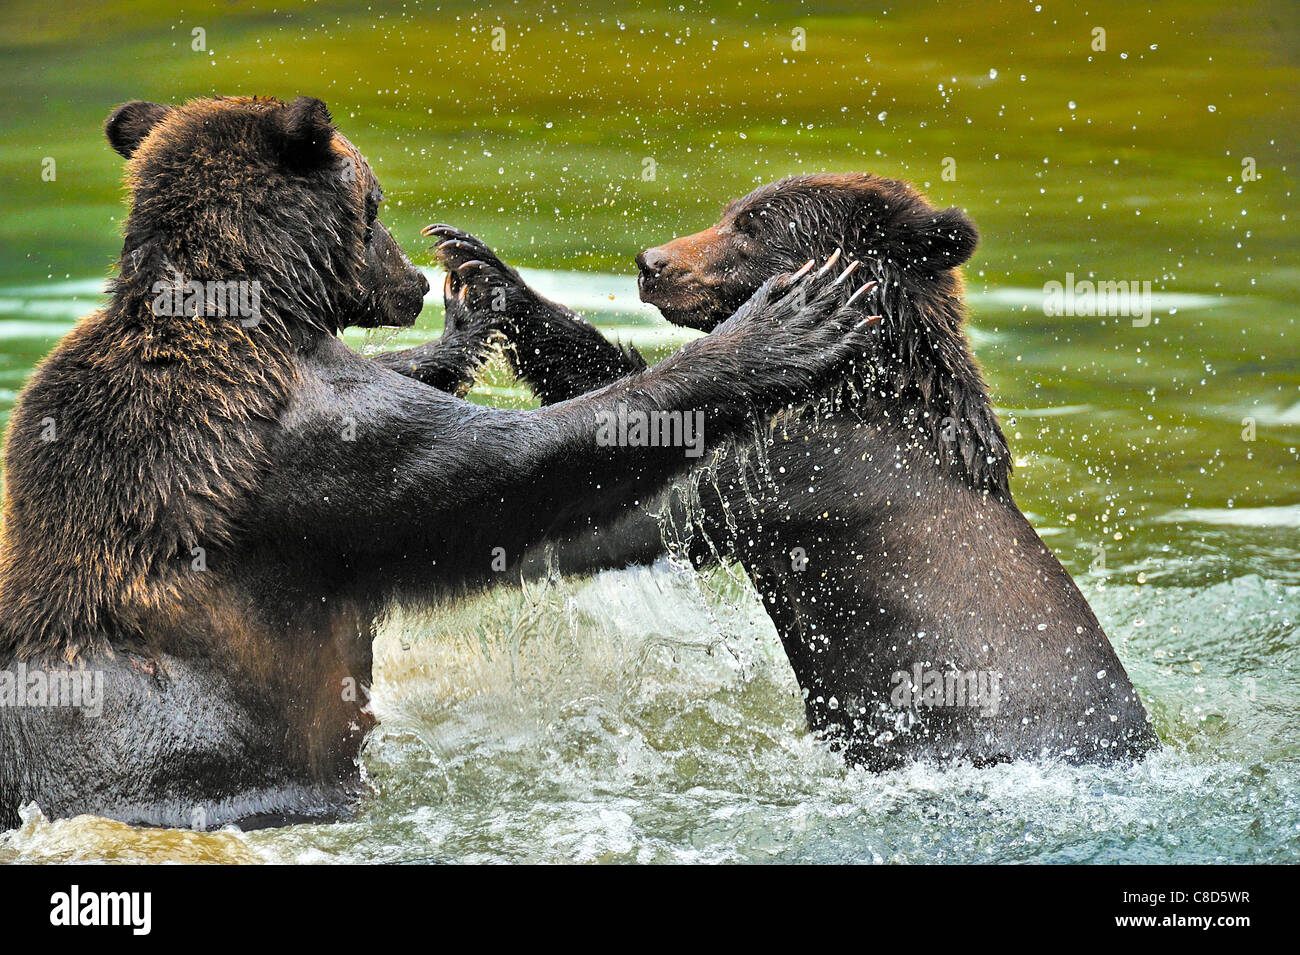 Two grizzly bears aggressively play fighting Stock Photo